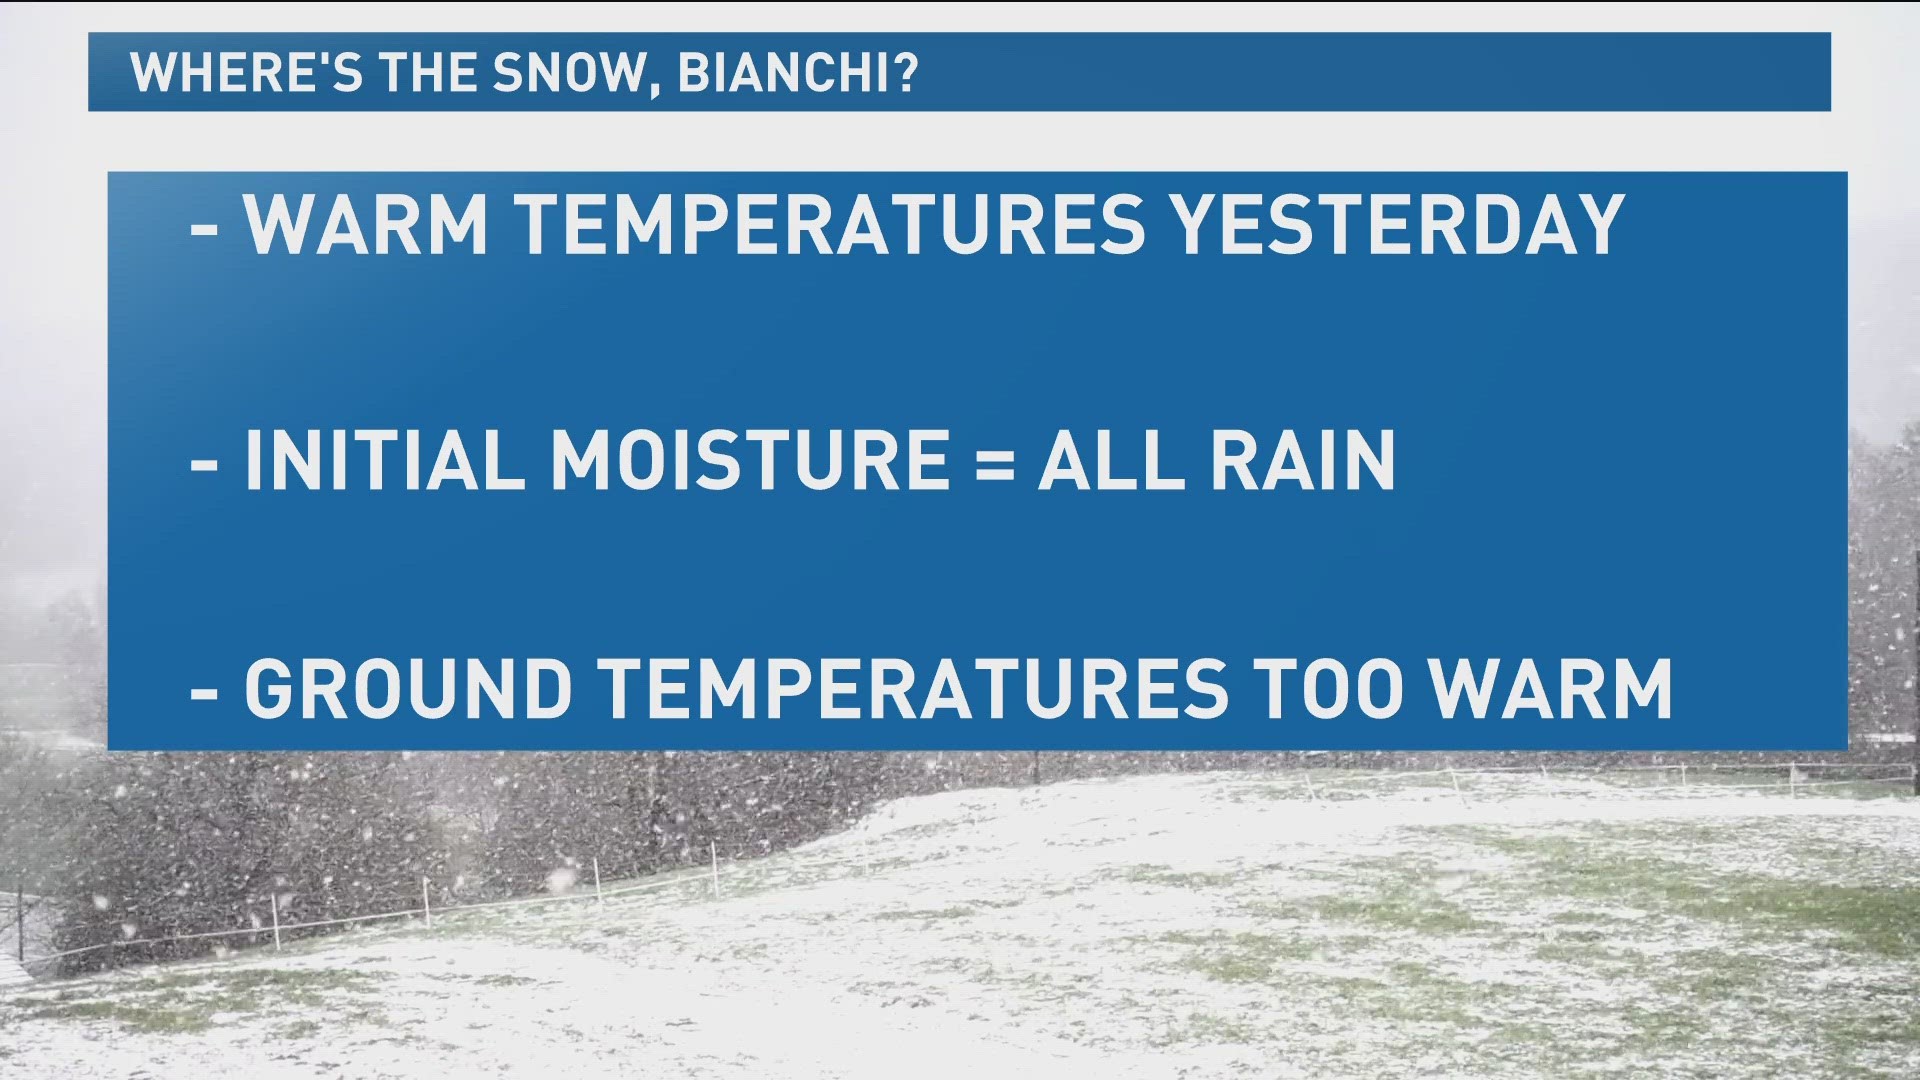 9NEWS meteorologist Chris Bianchi explains why snow totals were disappointing on Sunday, Dec. 24.